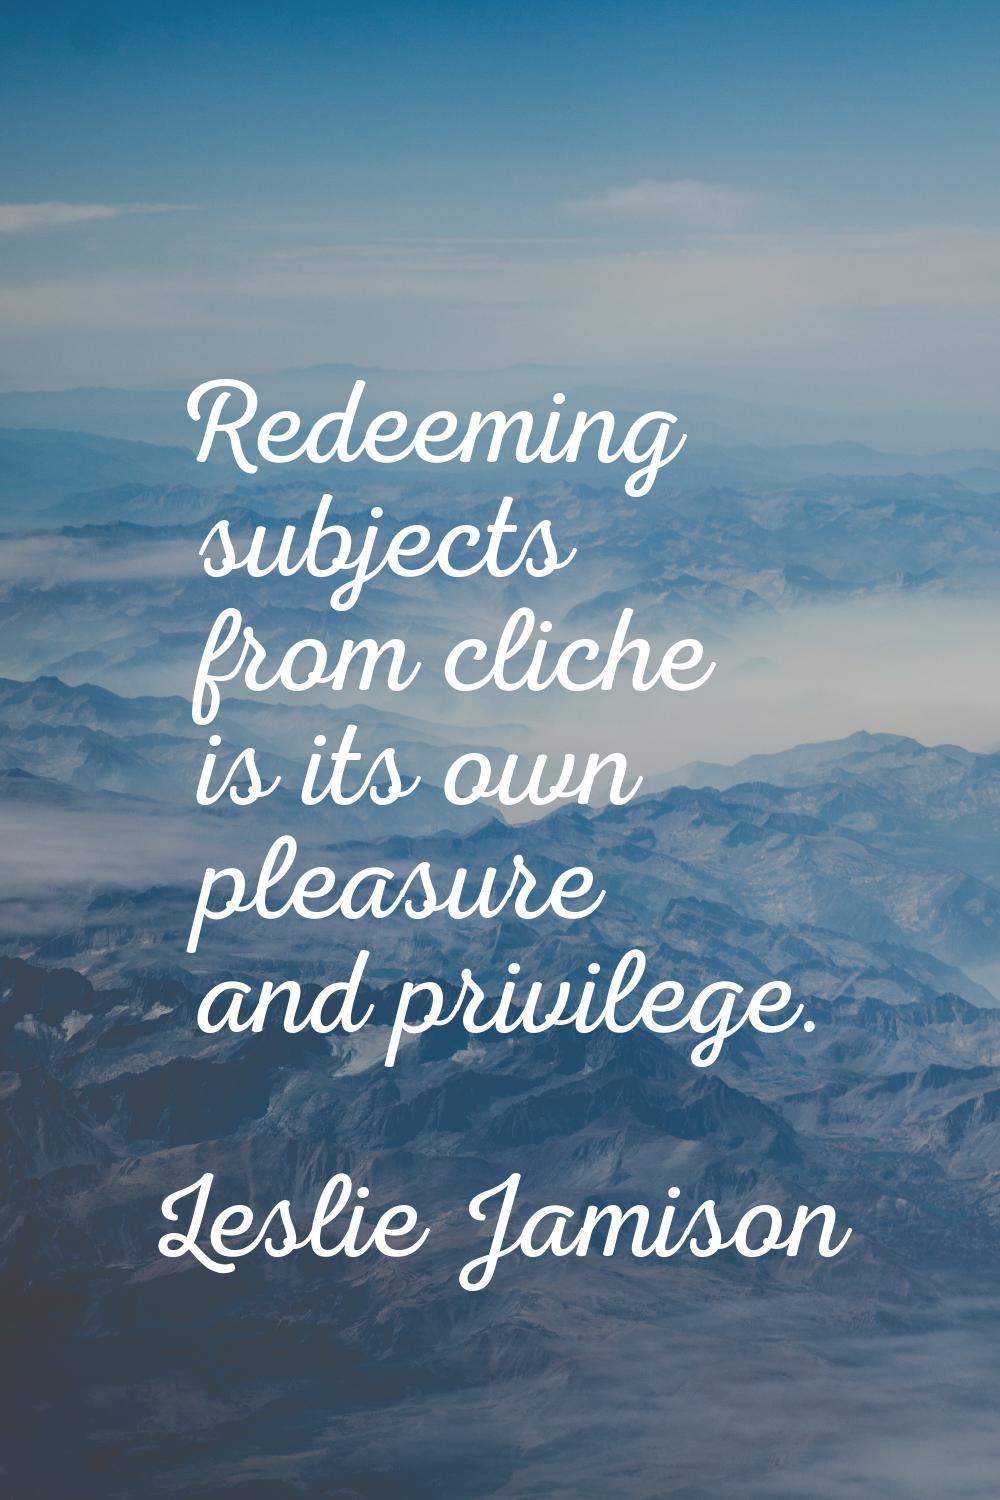 Redeeming subjects from cliche is its own pleasure and privilege.